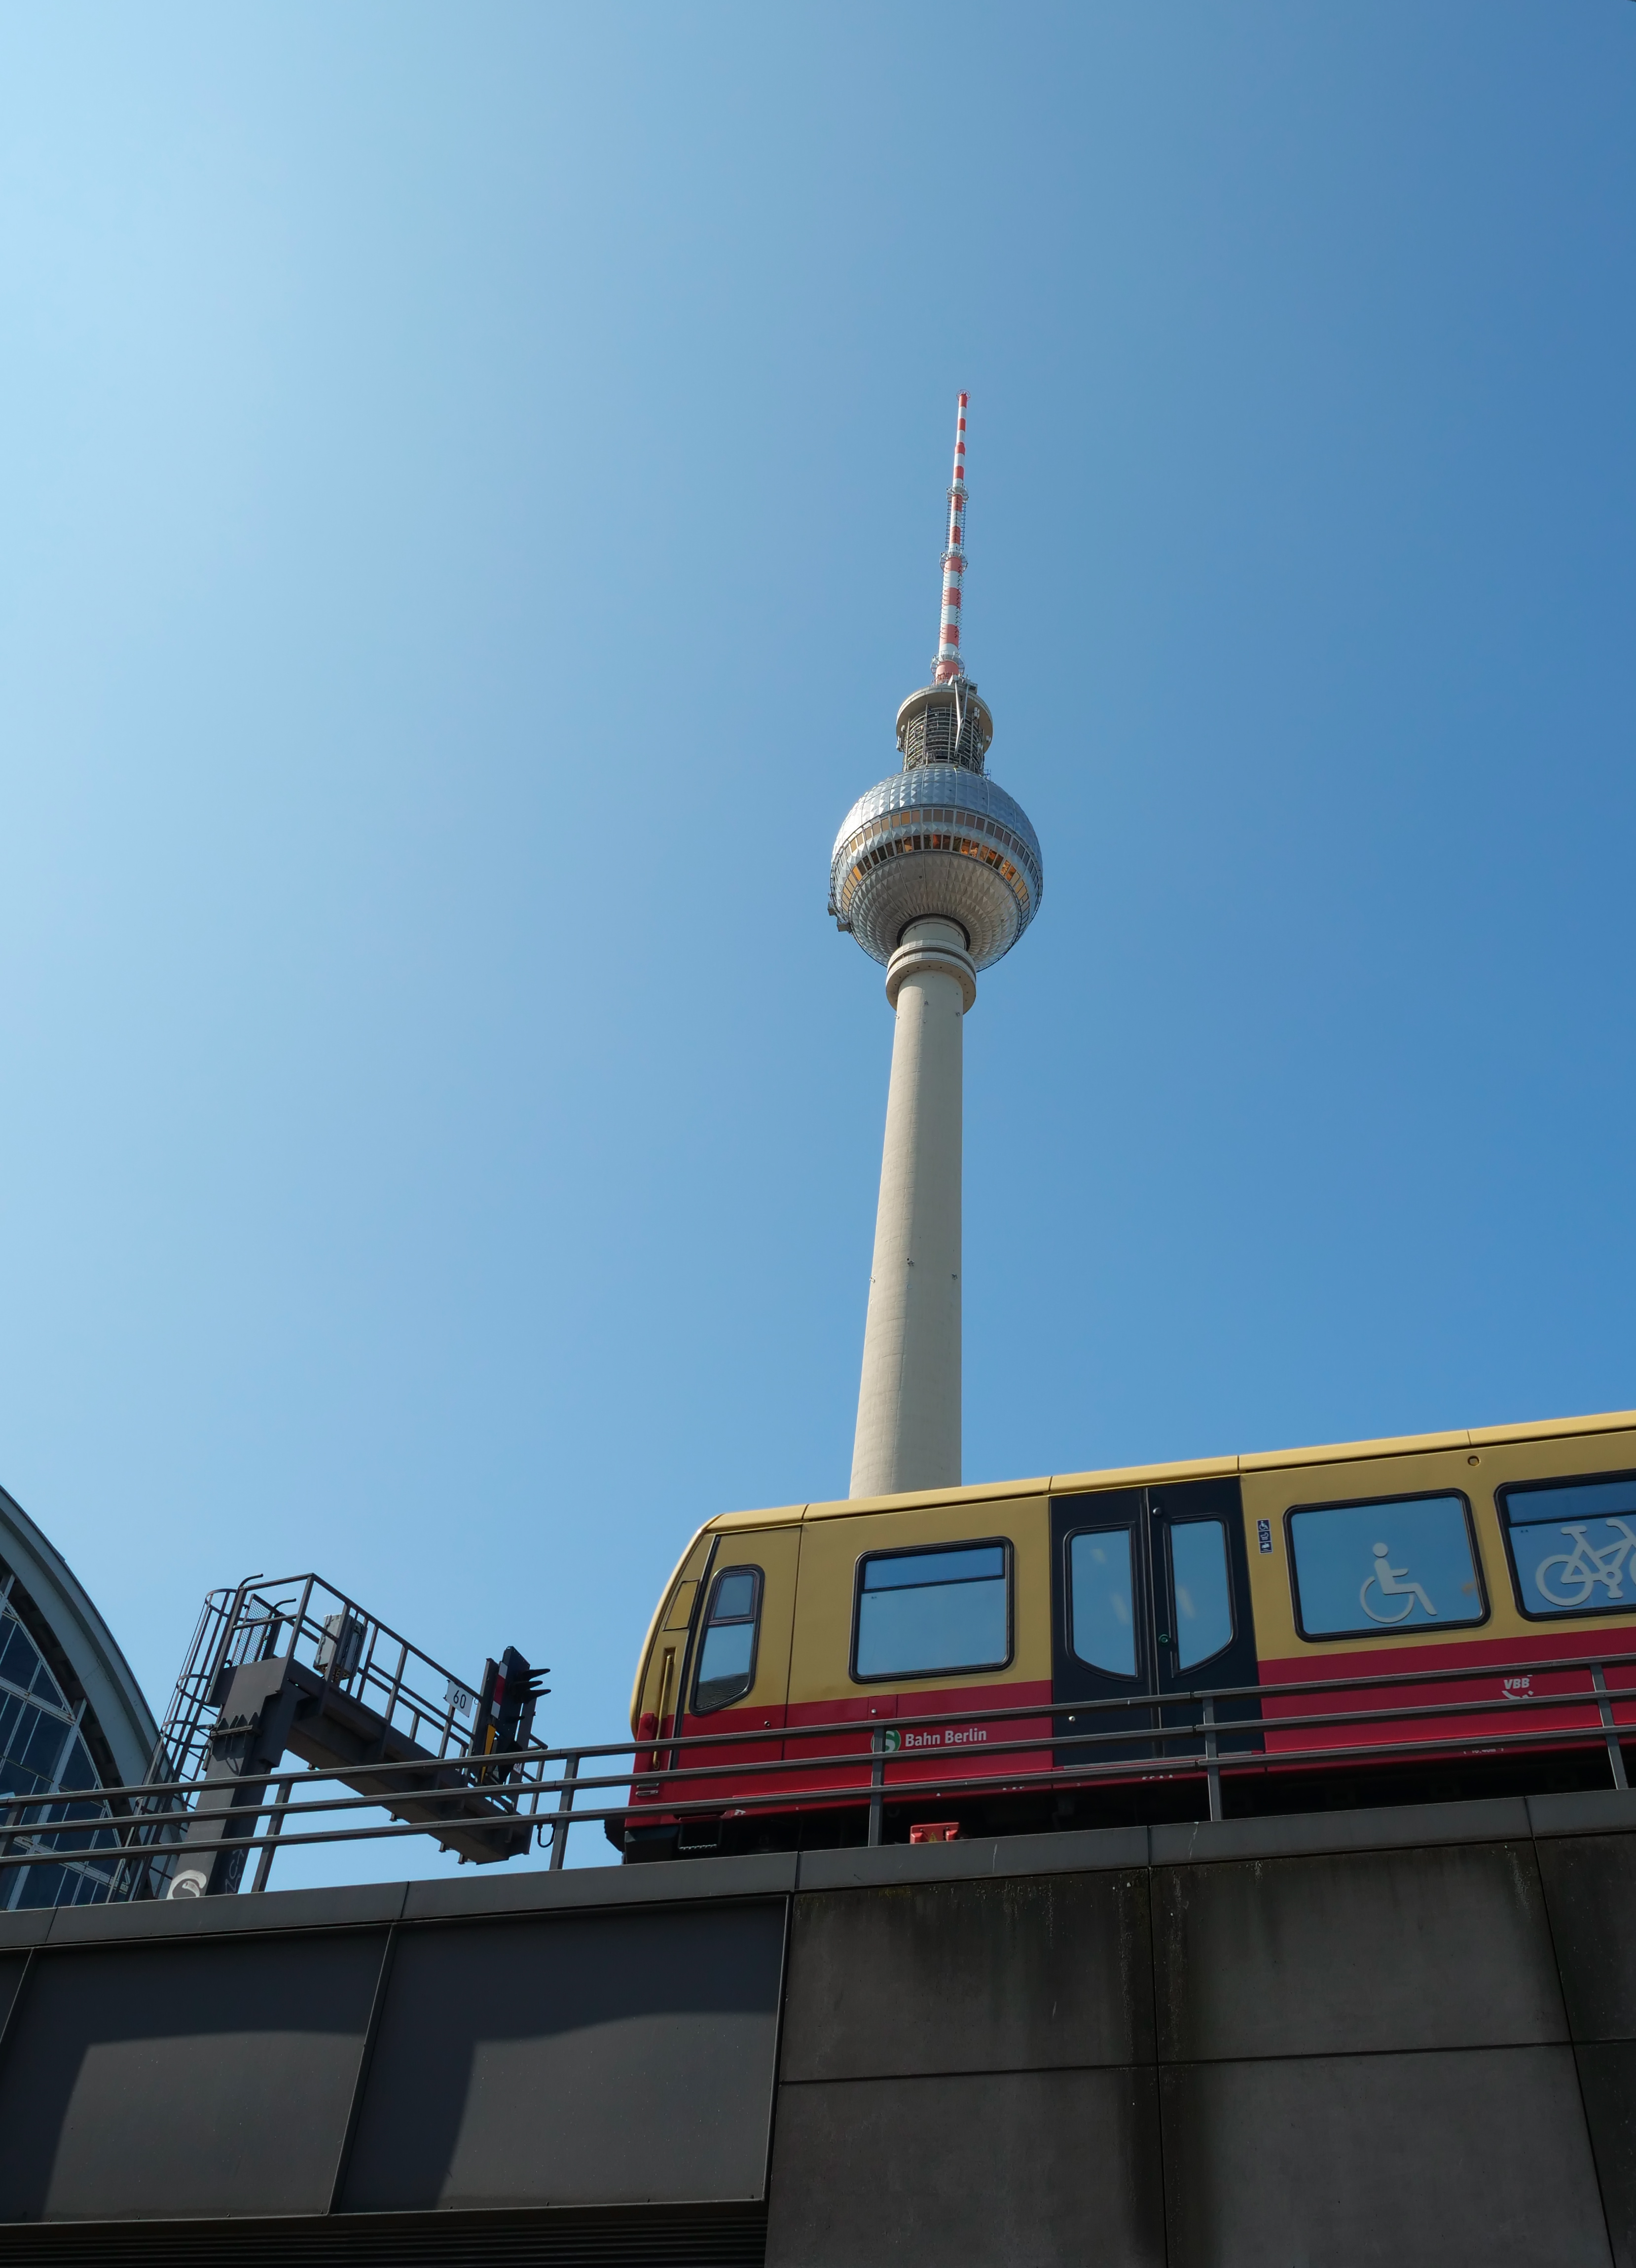 A yellow and red train passes in front of the Berlin Fernsehturm, or television tower, a tall, white needle-like structure.